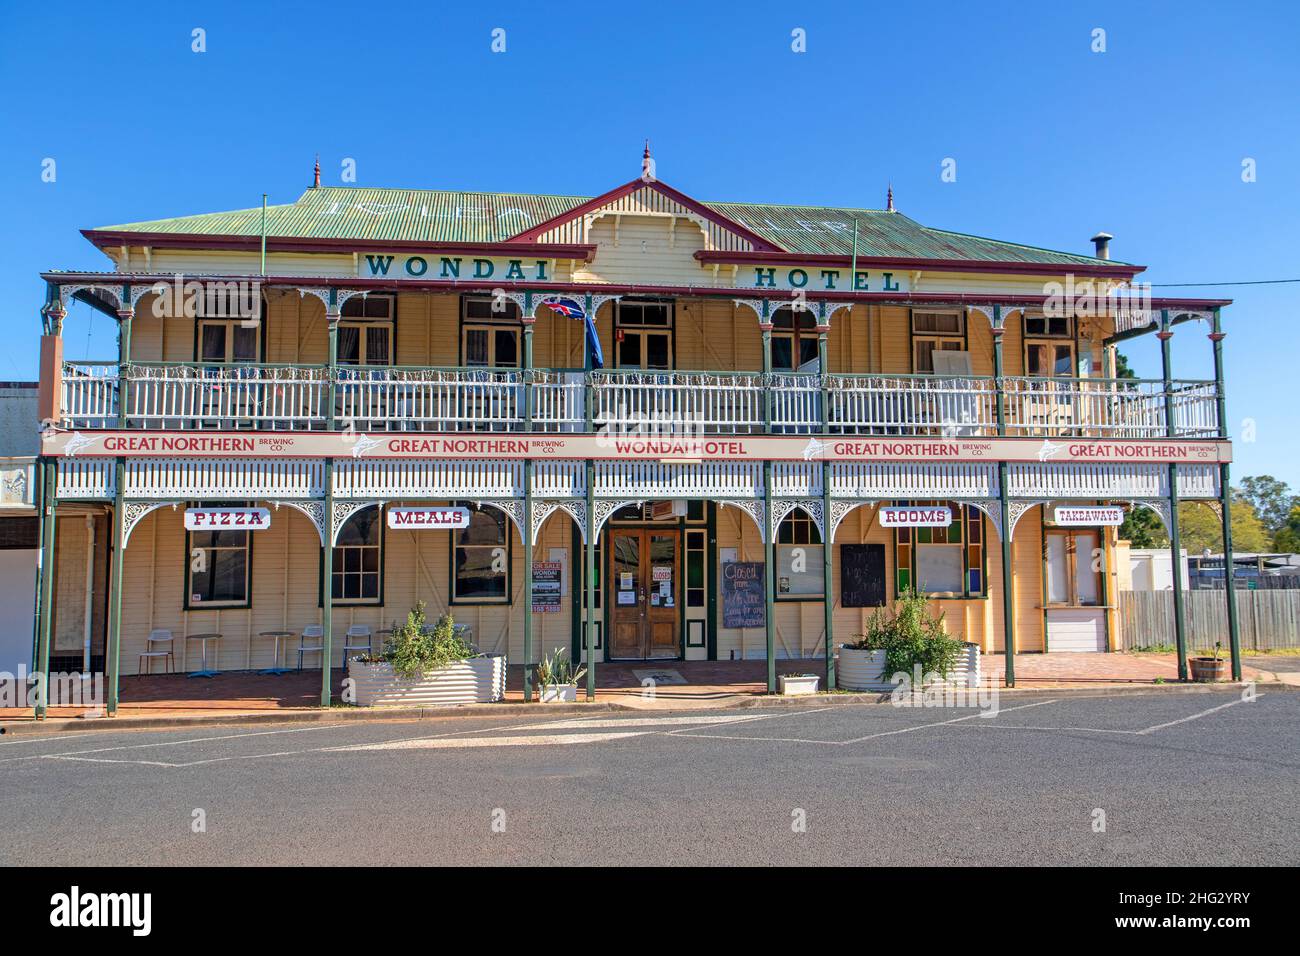 The Wondai Hotel in the Queensland town of Wondai Stock Photo